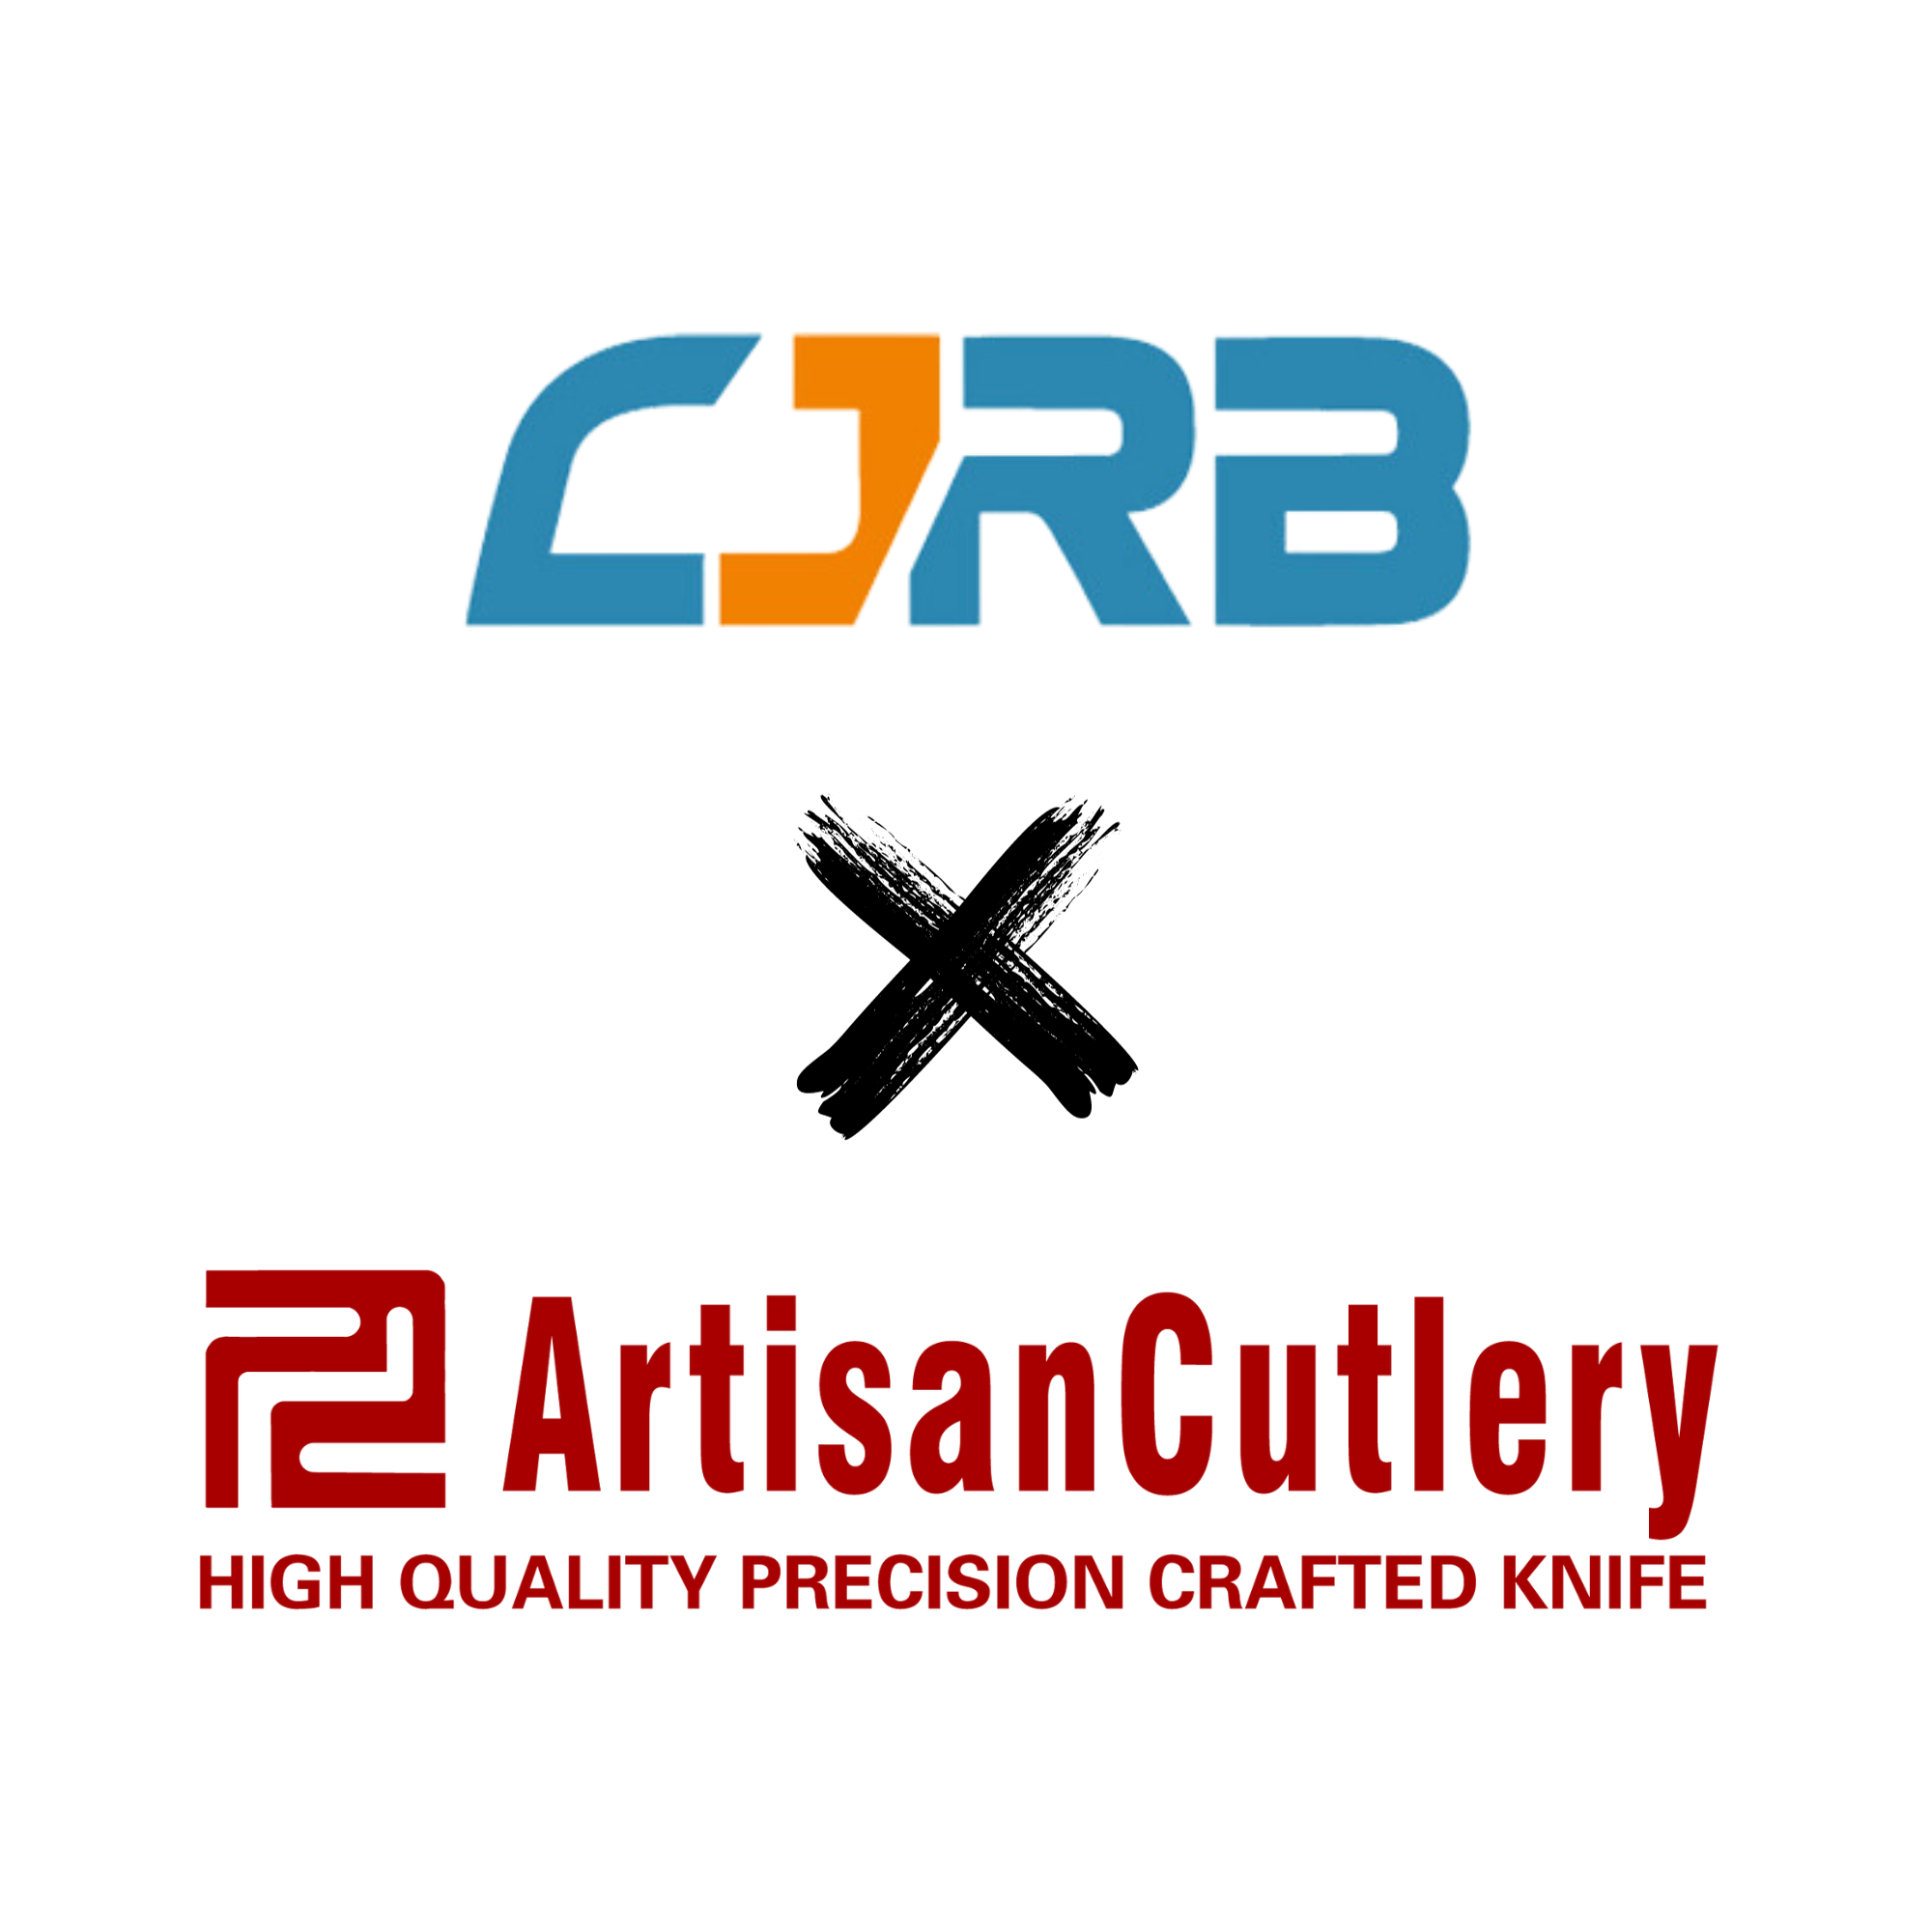 CJRB and ArtisanCutlery: Exploring Two Distinct Paths for EDC Enthusiasts